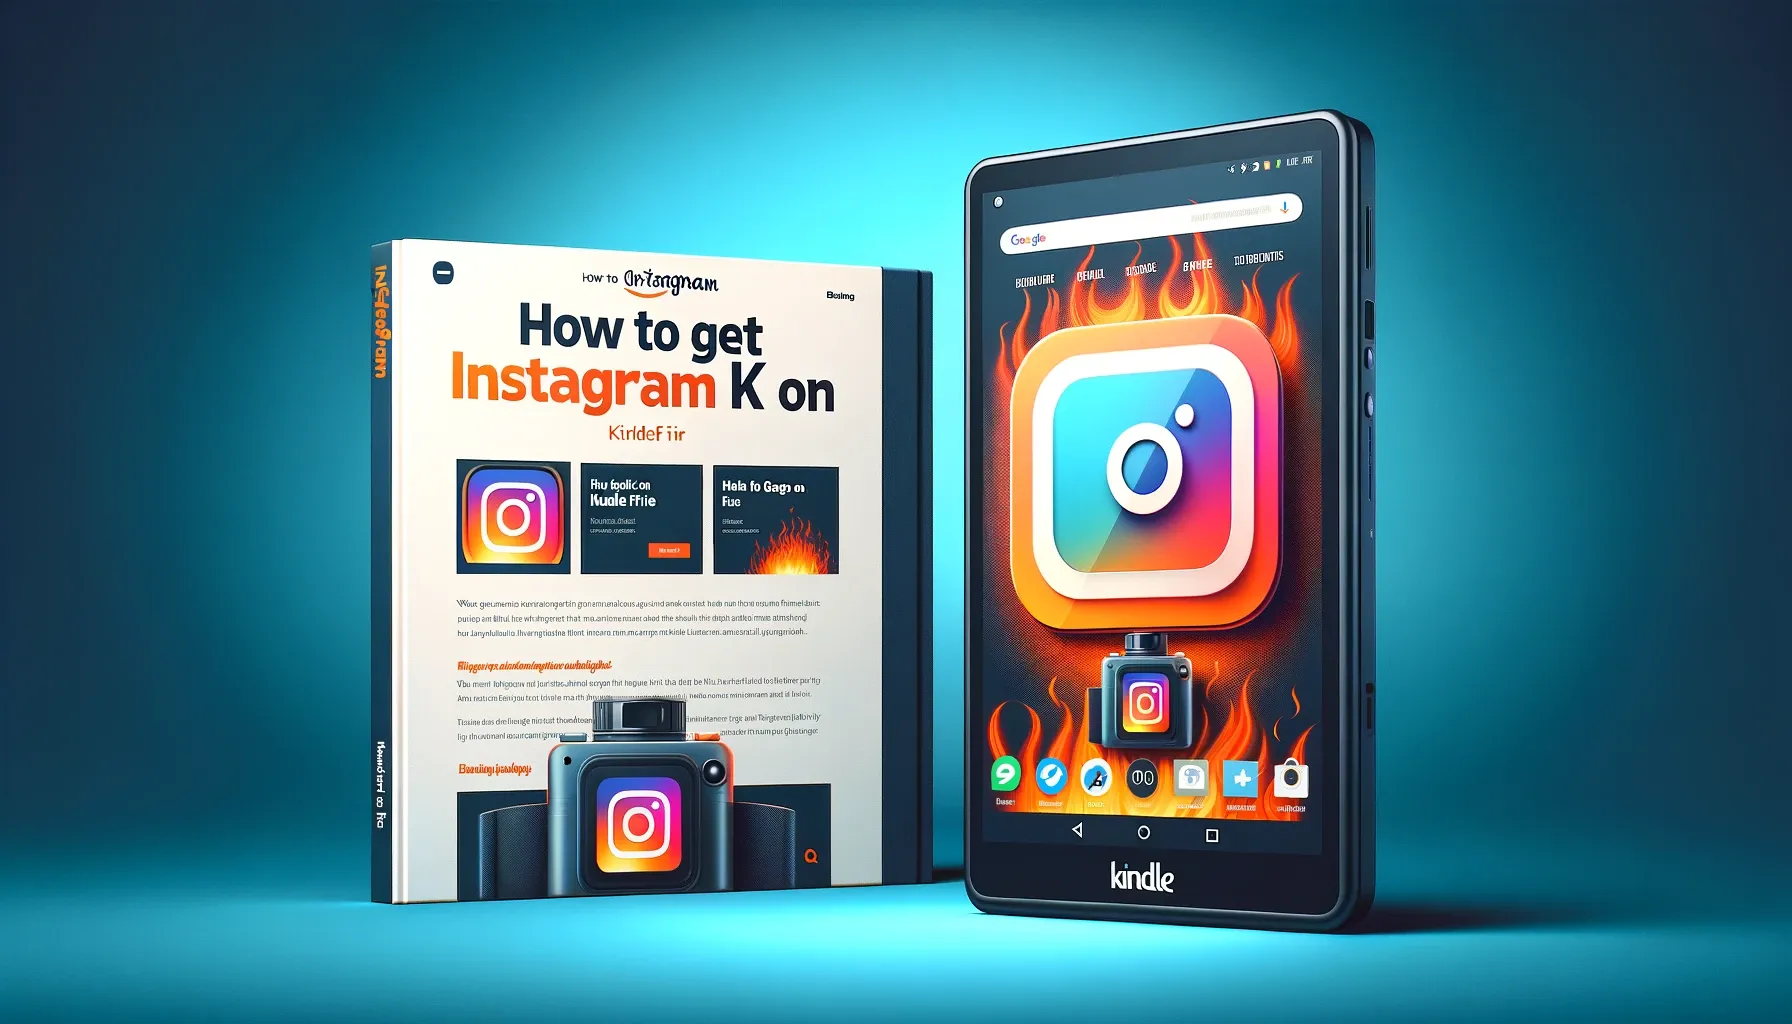 How to get Instagram on Kindle Fire?